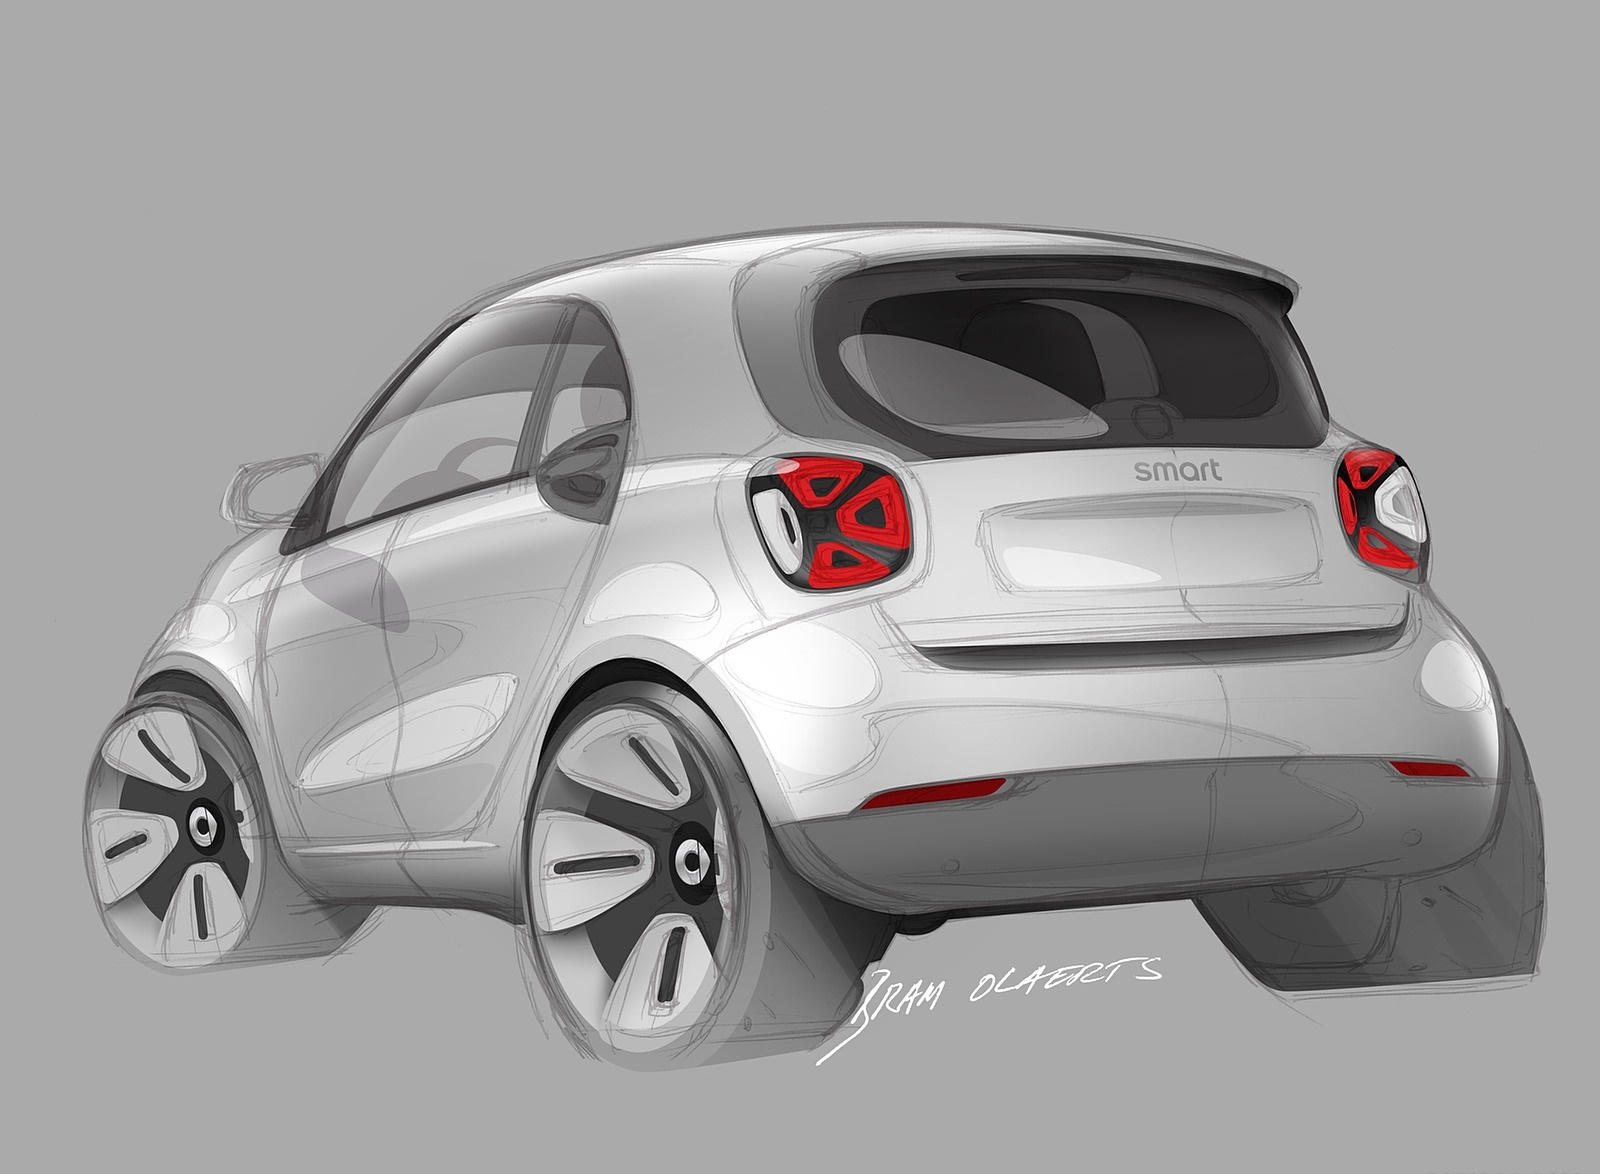 2020 Smart EQ ForTwo Coupe Design Sketch Wallpapers #93 of 94